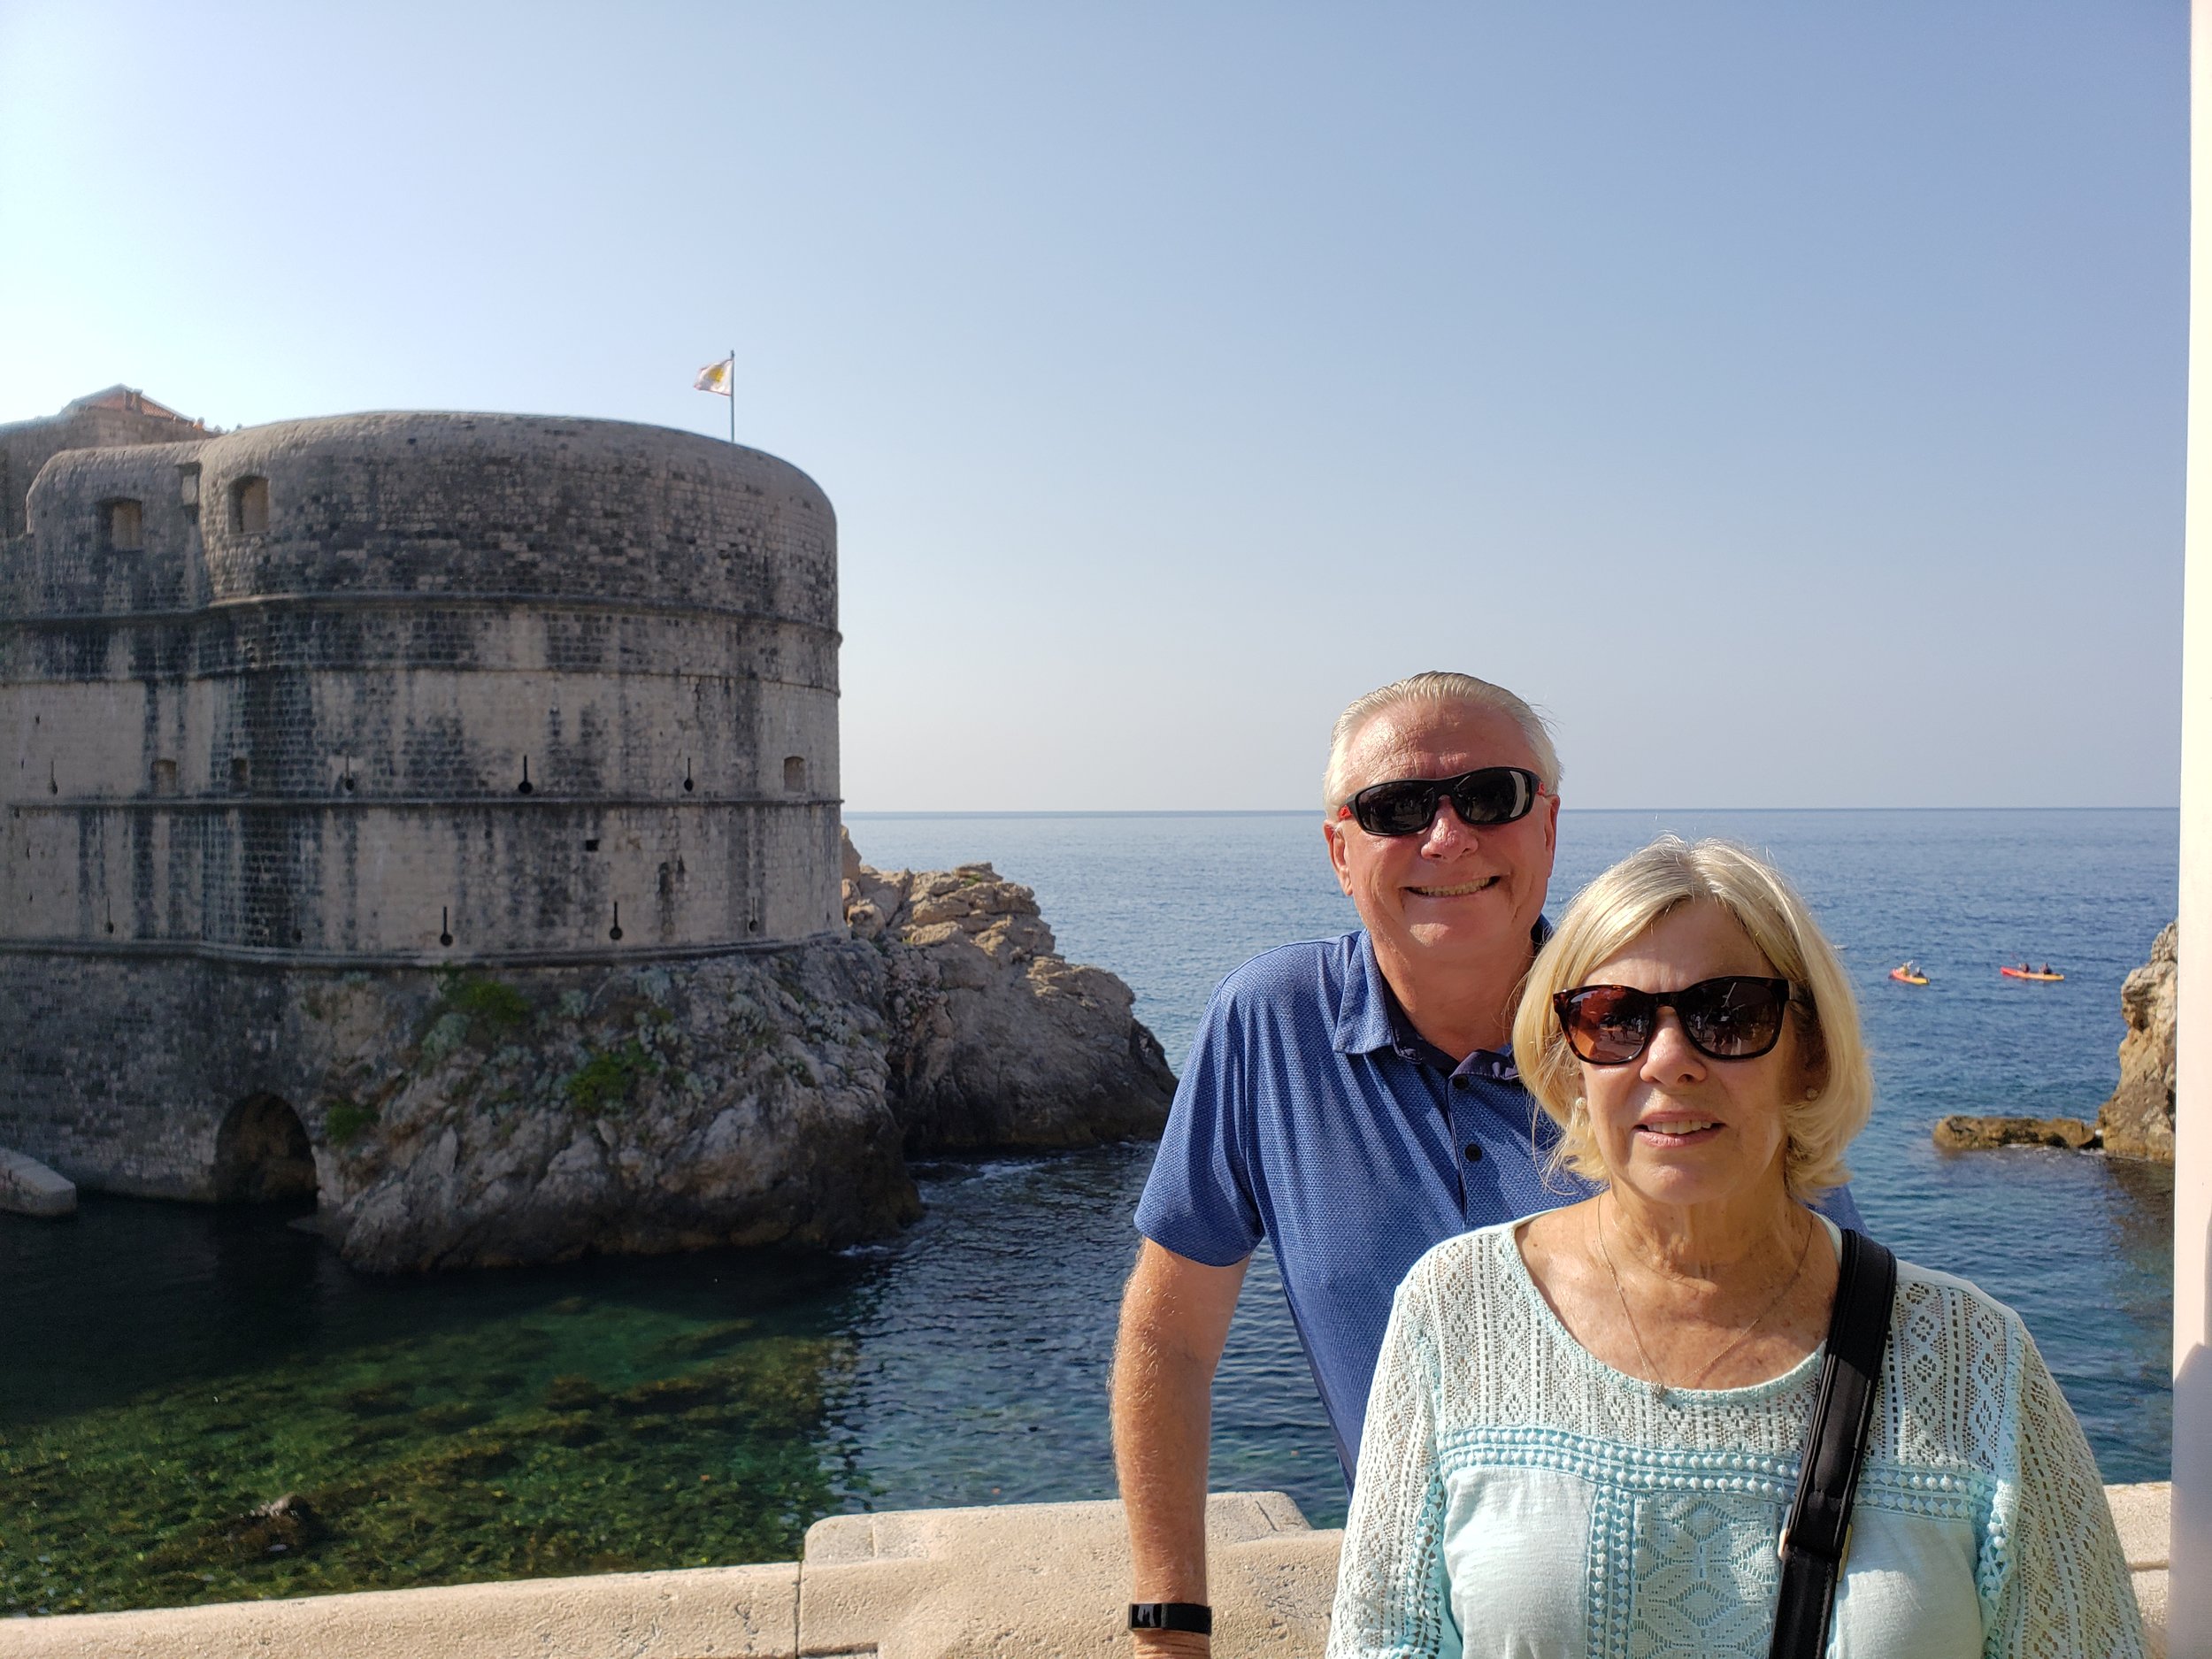  Blaine &amp; Jeri outside the walls of Dubrovnik with one of the ramparts in the background 